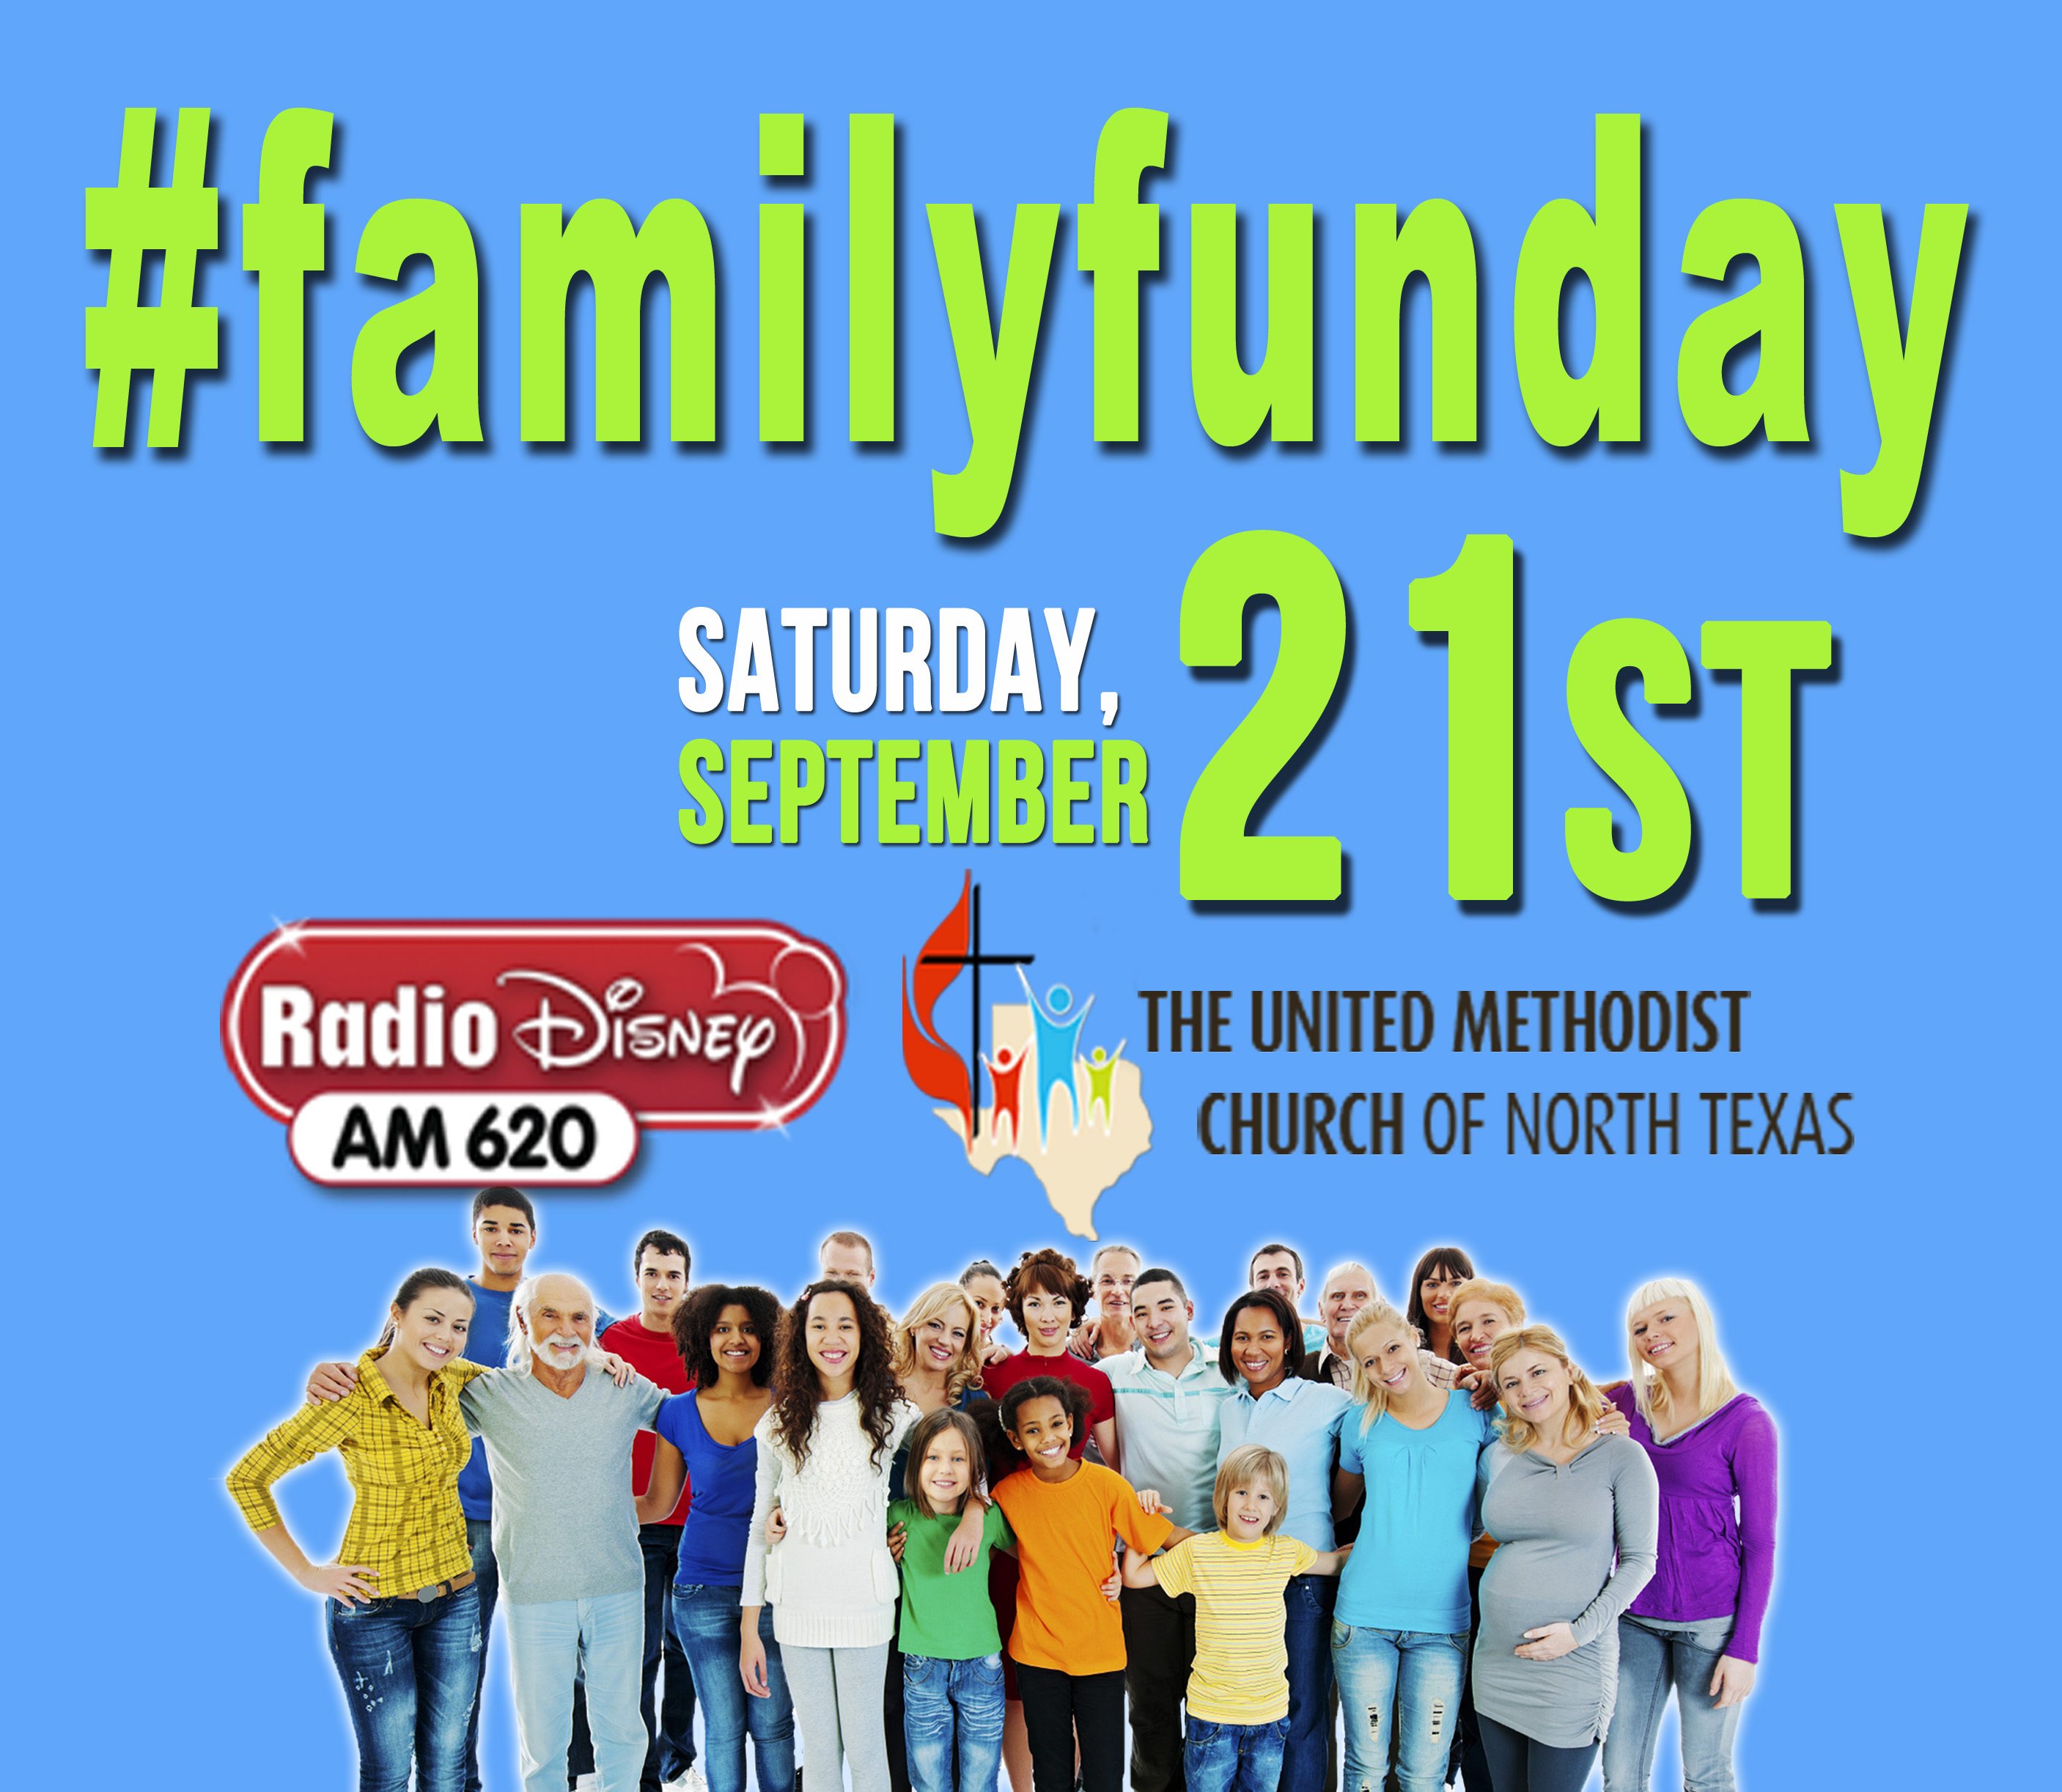 United Methodist Churches of North Texas to Host Family Fun Day